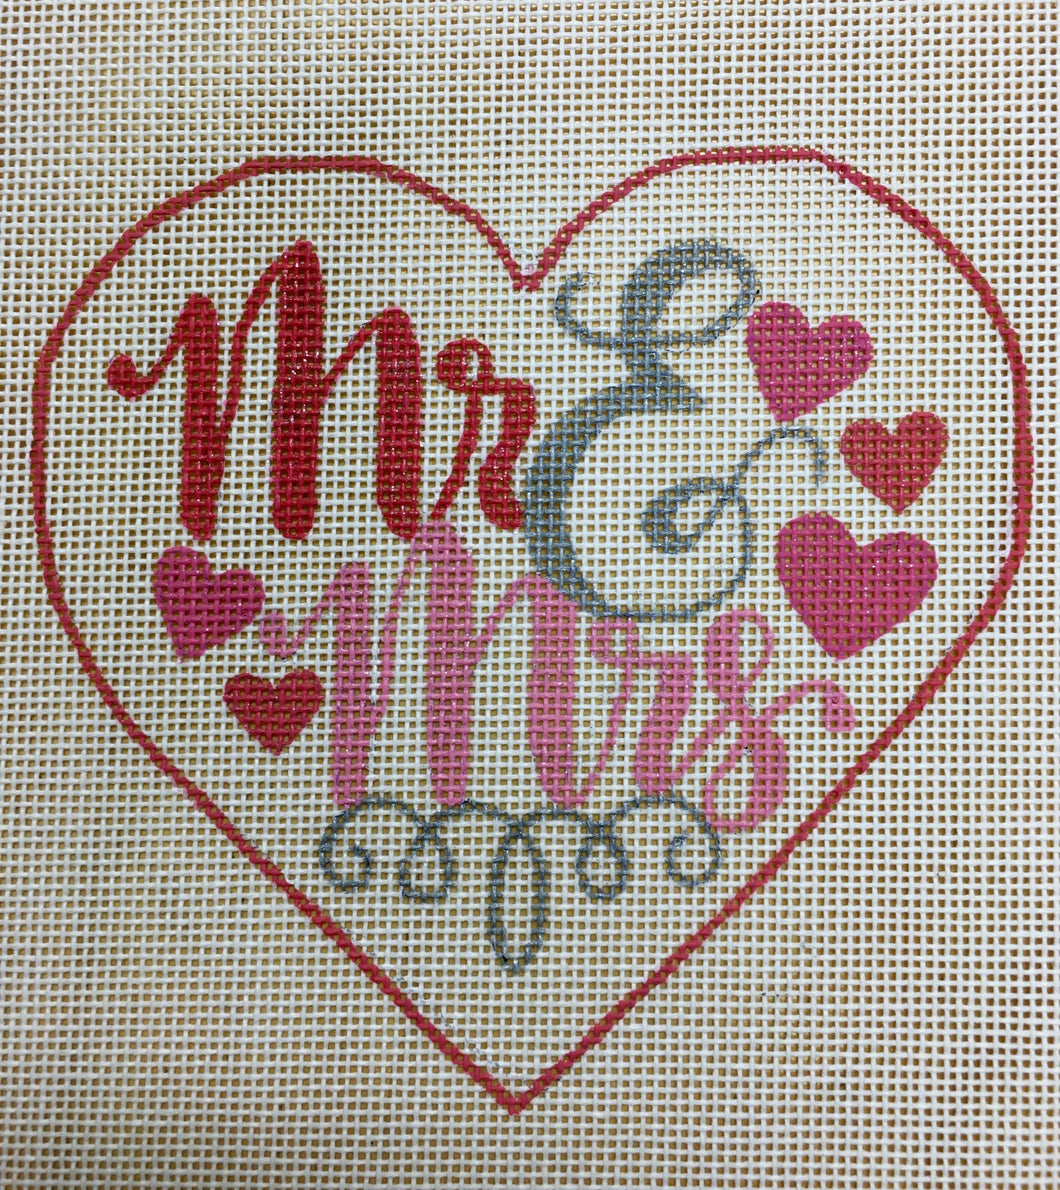 APWE04-RP mr & mrs heart, red & pink